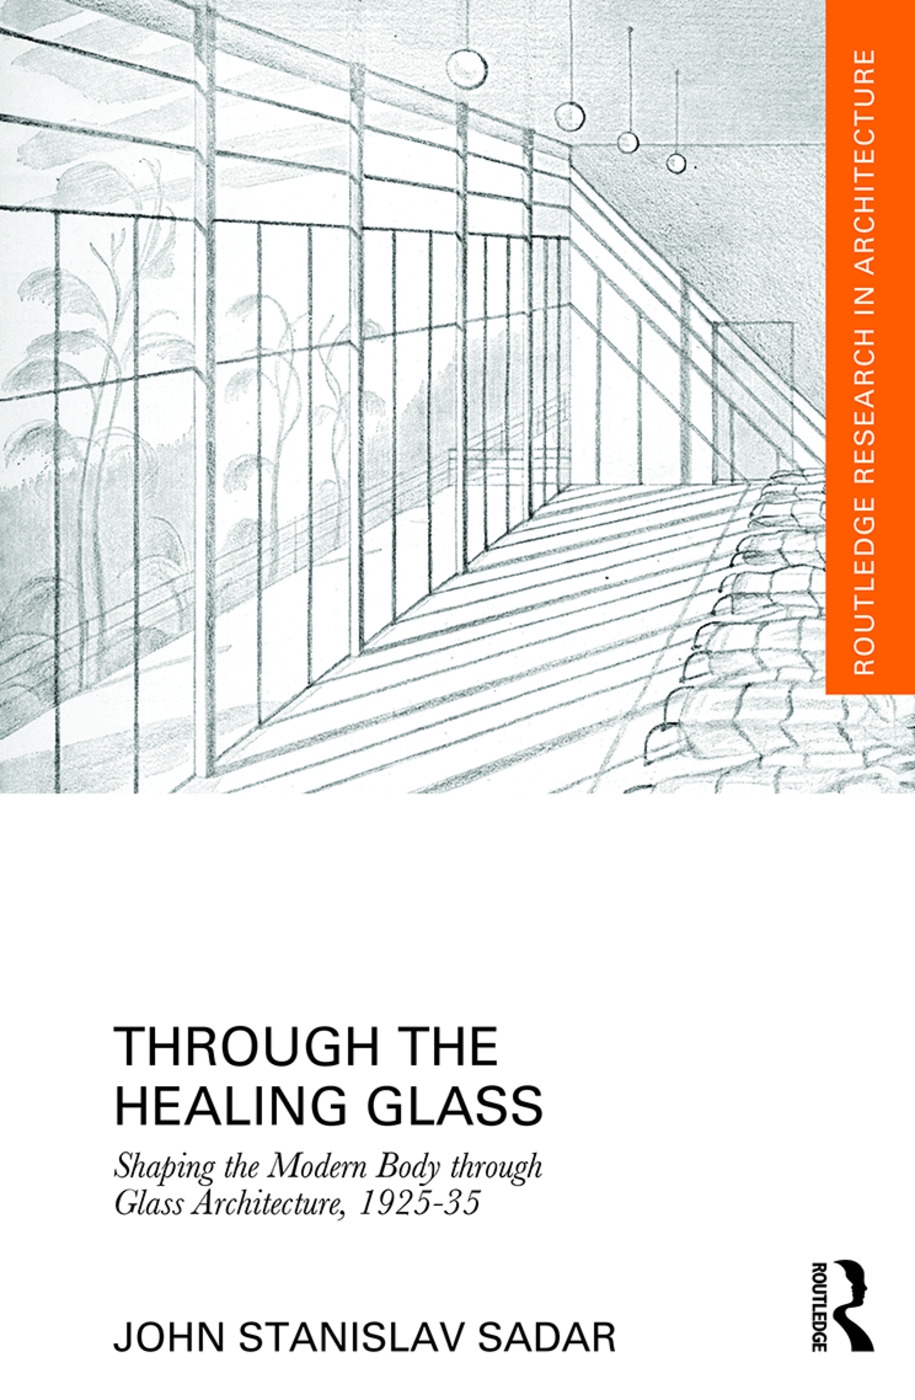 Through the Healing Glass: Shaping the Modern Body Through Glass Architecture, 1925-35